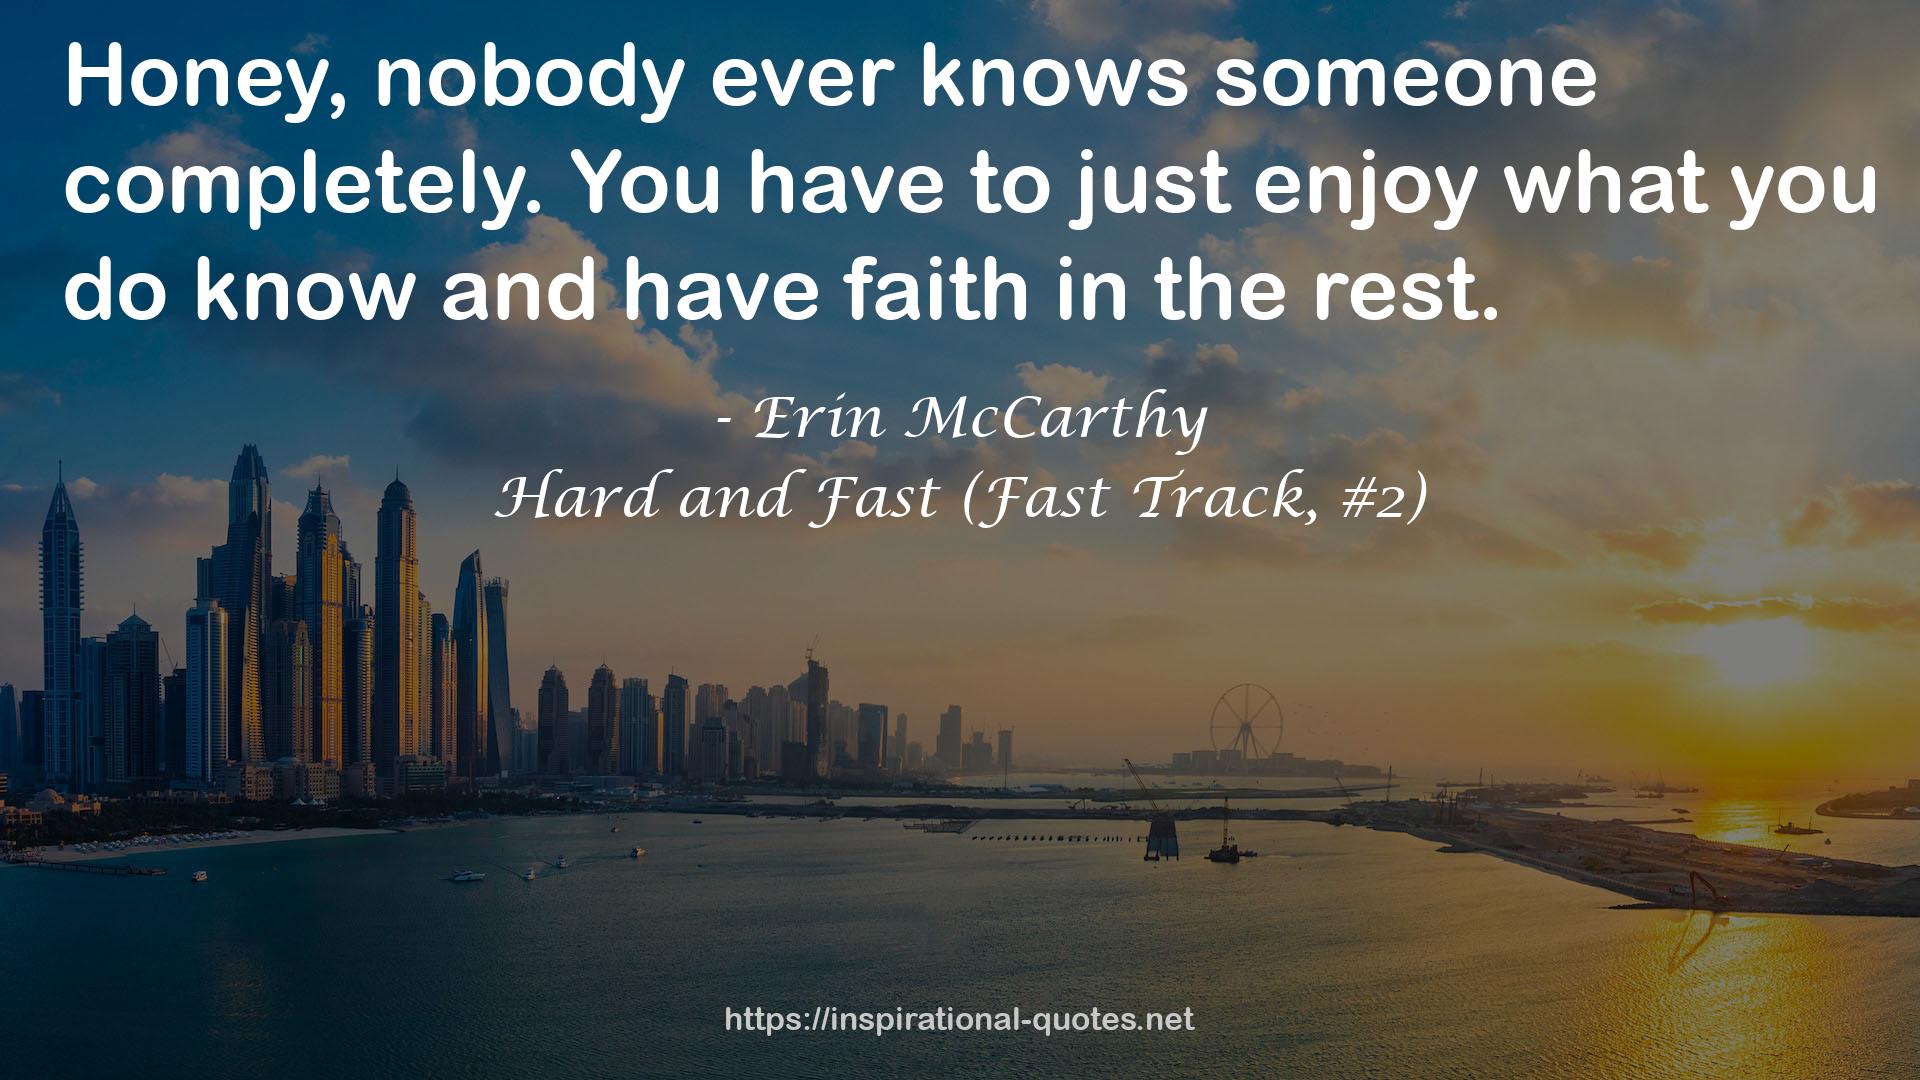 Hard and Fast (Fast Track, #2) QUOTES